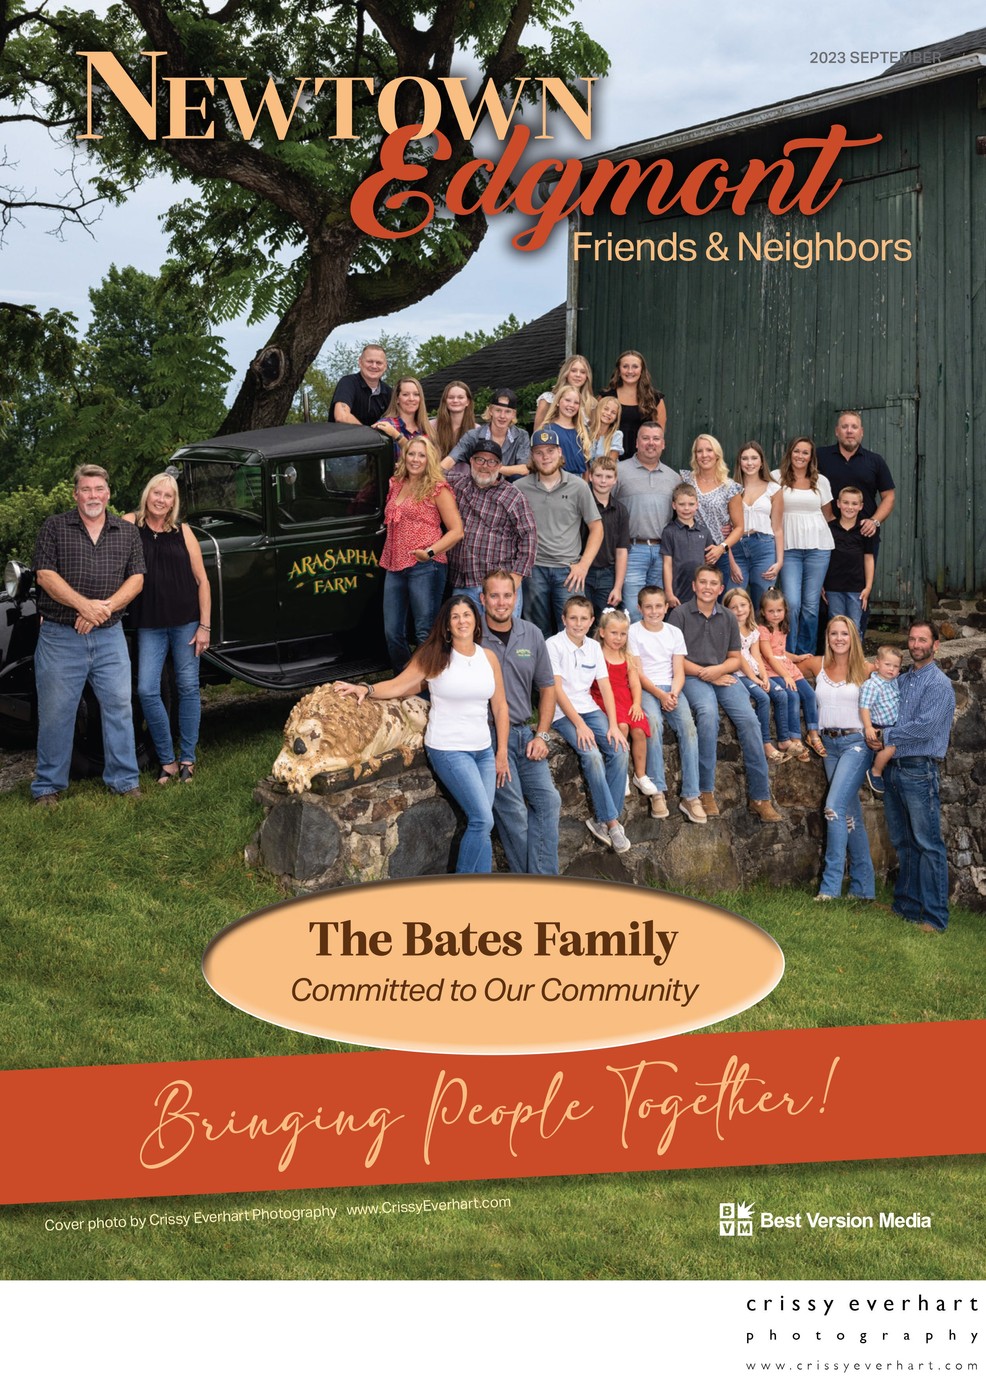 Large Extended Family Photo for Publication